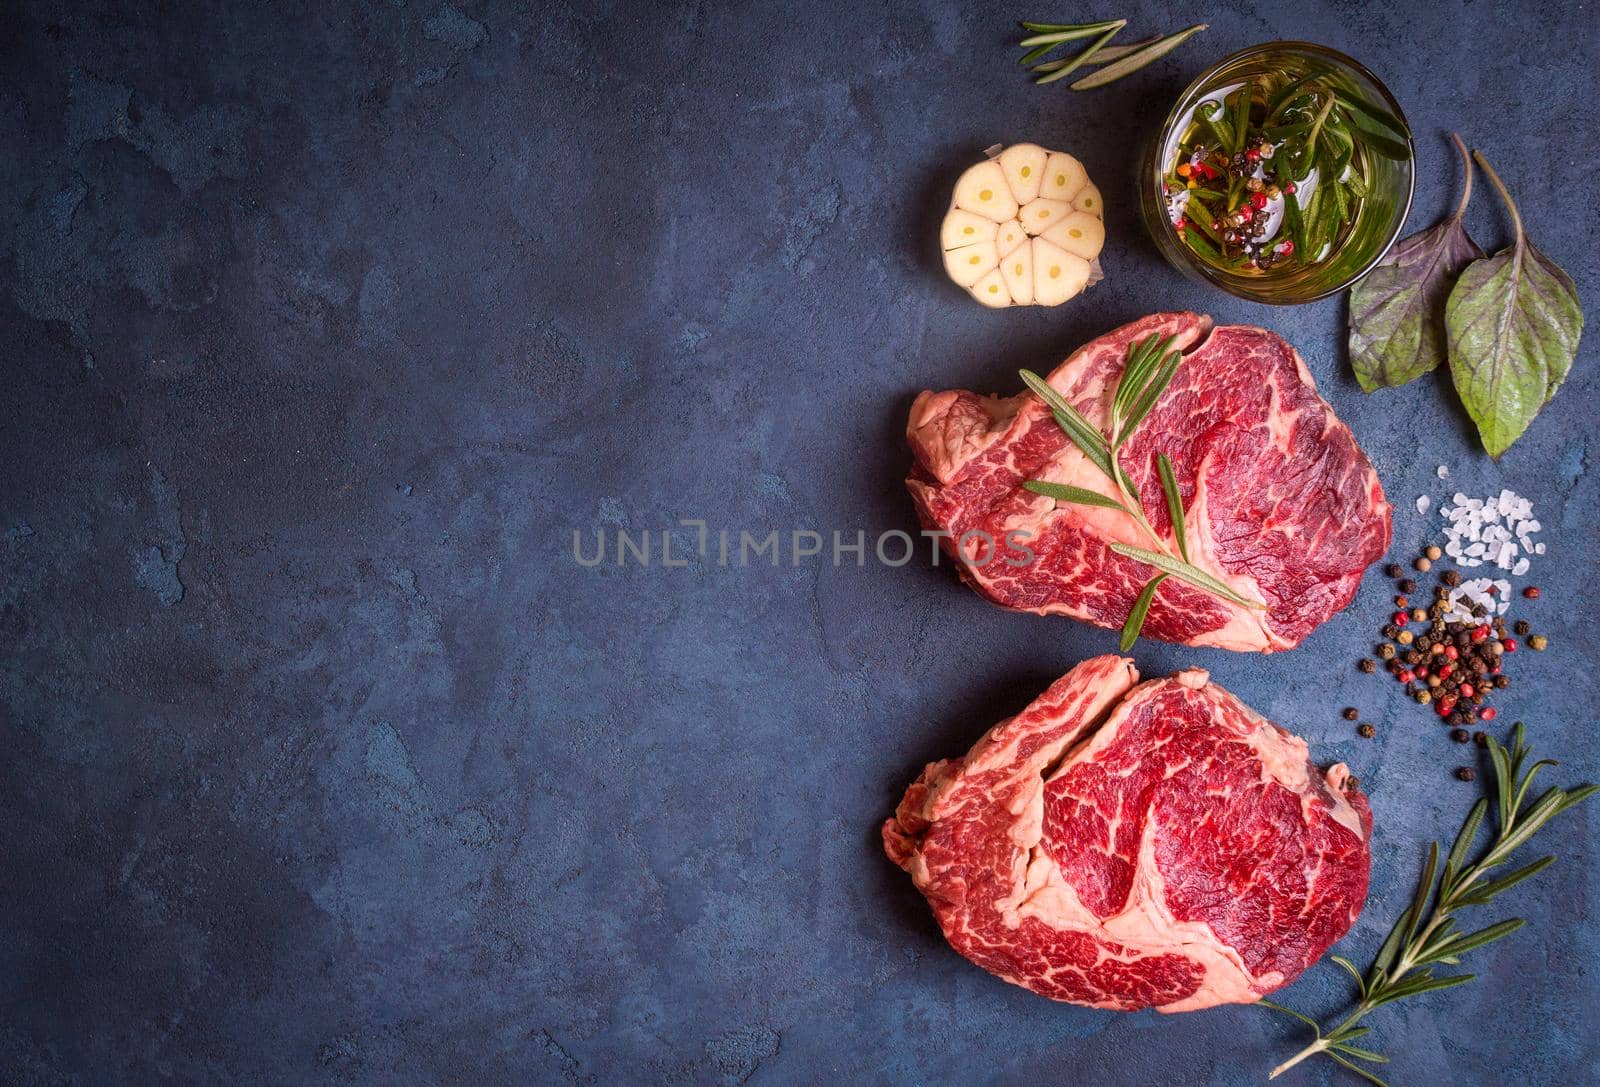 Raw juicy ribeye steaks with seasonings ready for roasting on rustic concrete background. Fresh marbled meat steaks with herbs, garlic, olive oil, whole pepper and rock salt. Space for text. Top view